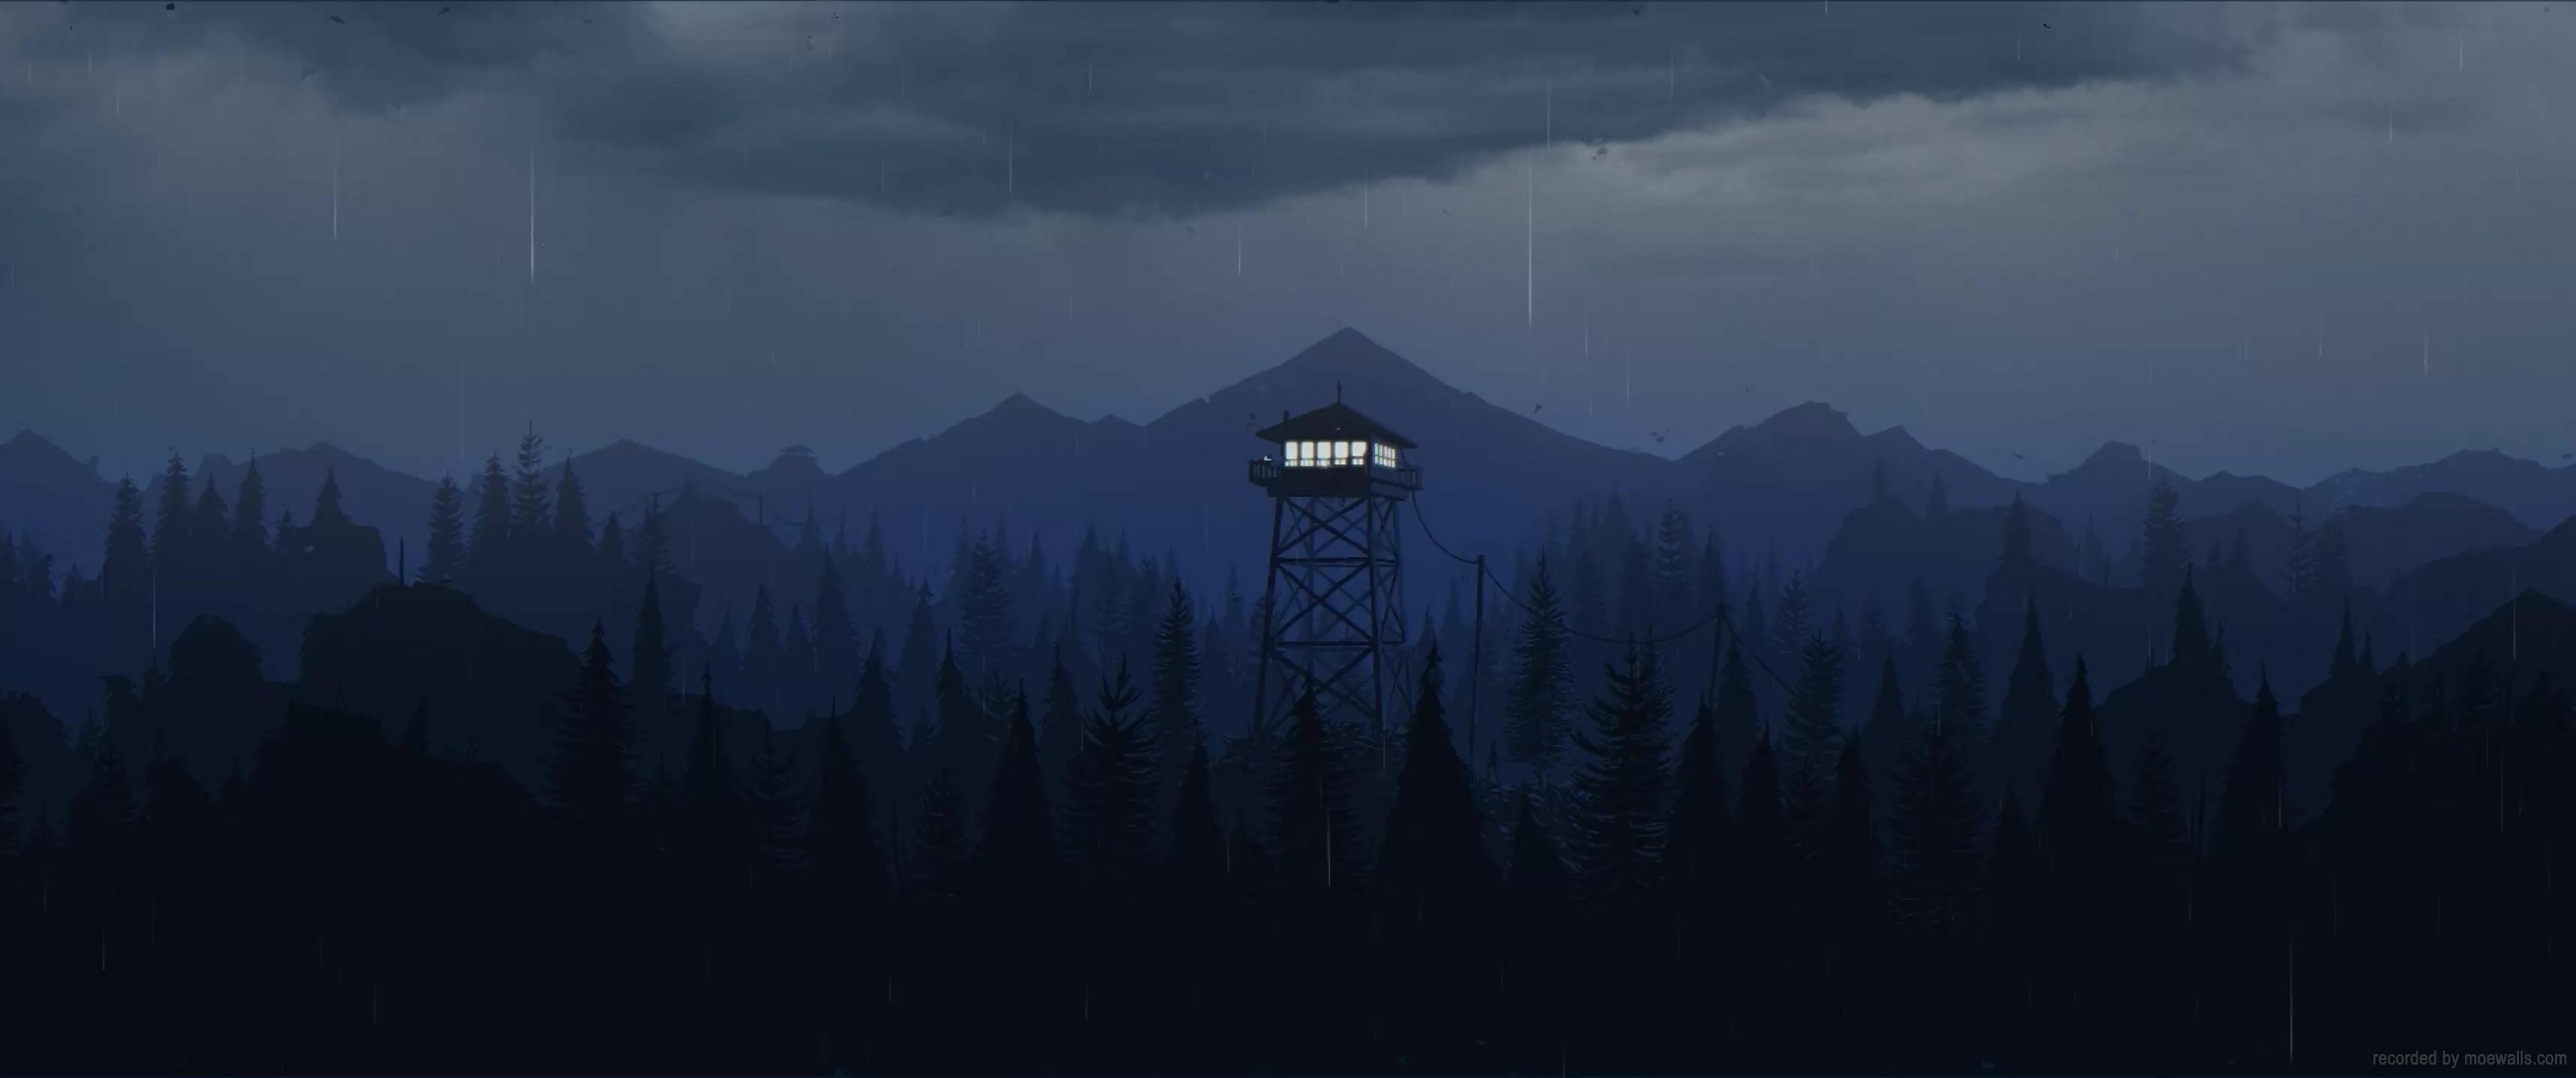 The Firewatch Tower - Night, an art print by Drawing WithMouse - INPRNT